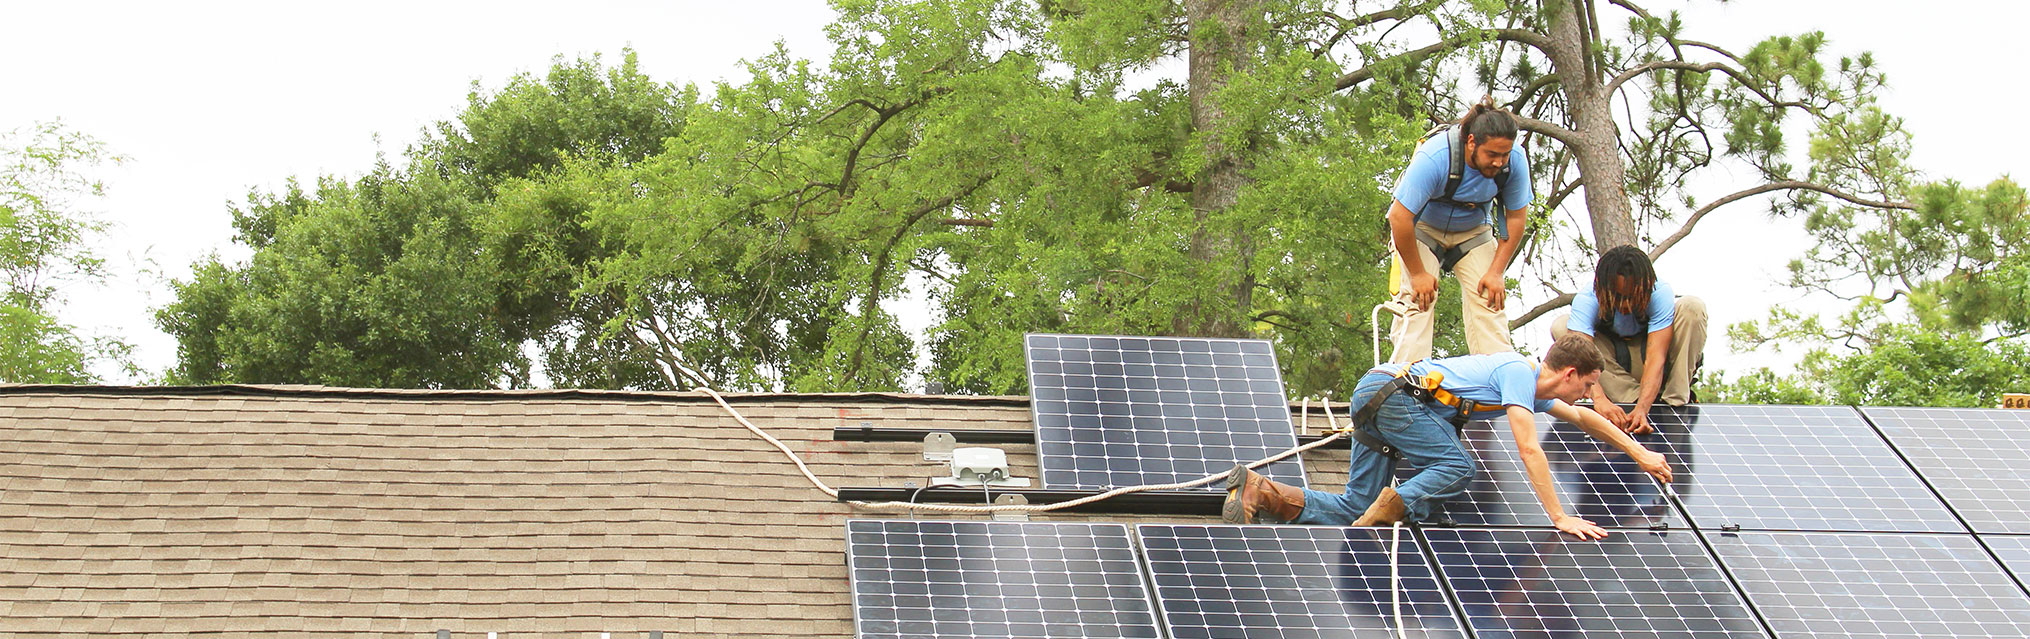 Everything you need to know about rooftop solar panels
